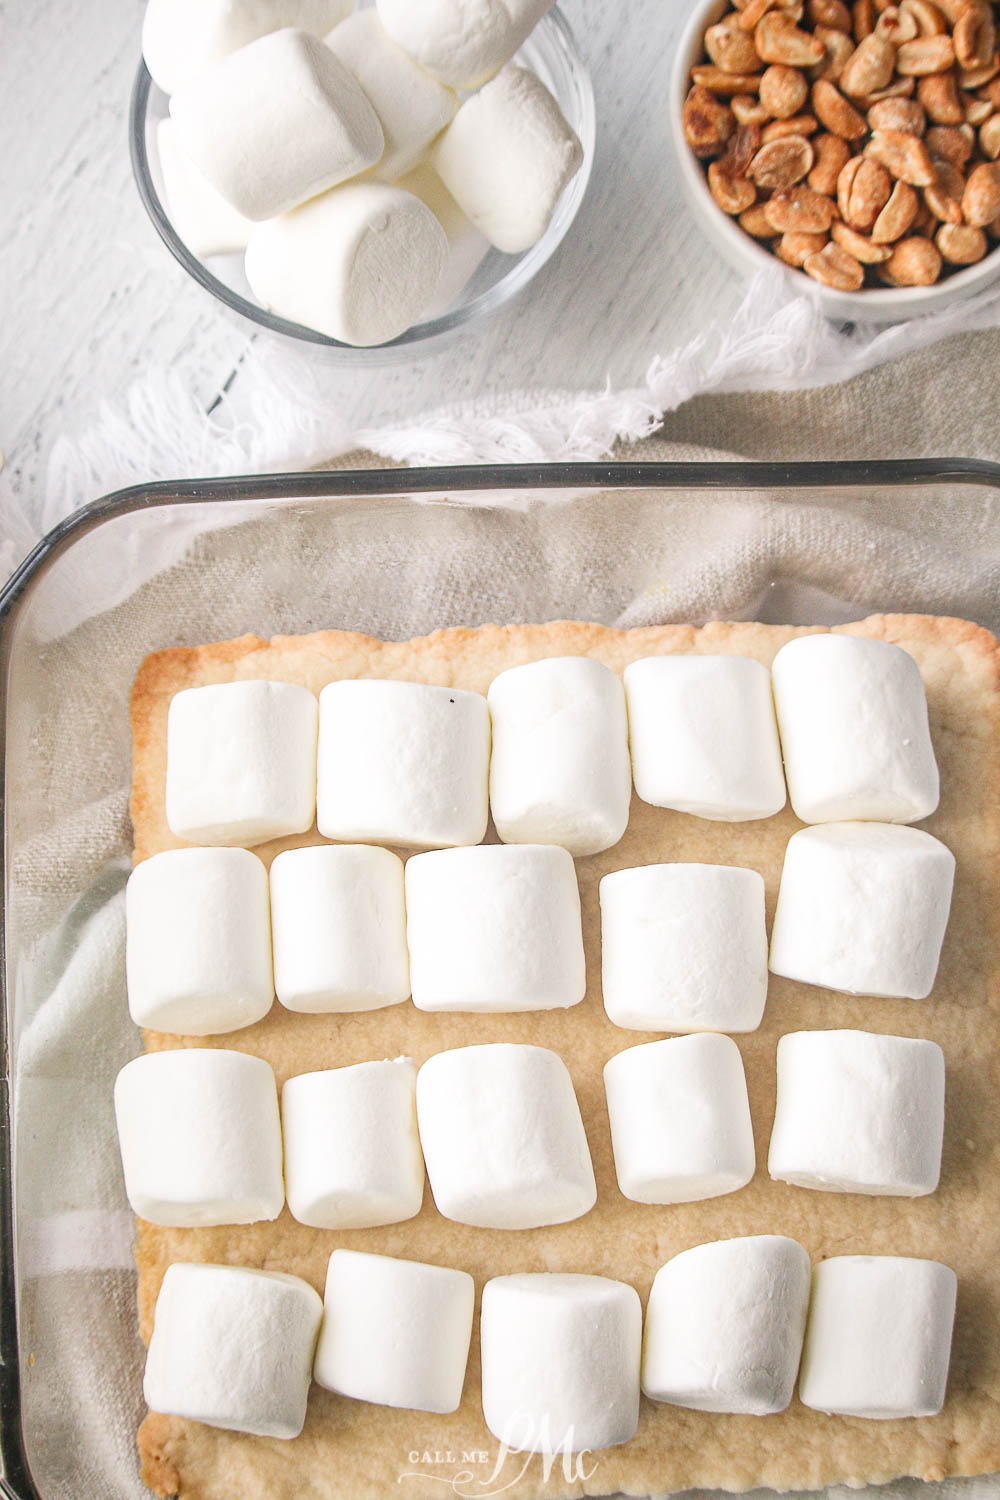 marshmallows lined up in a baking pan over dessert batter.